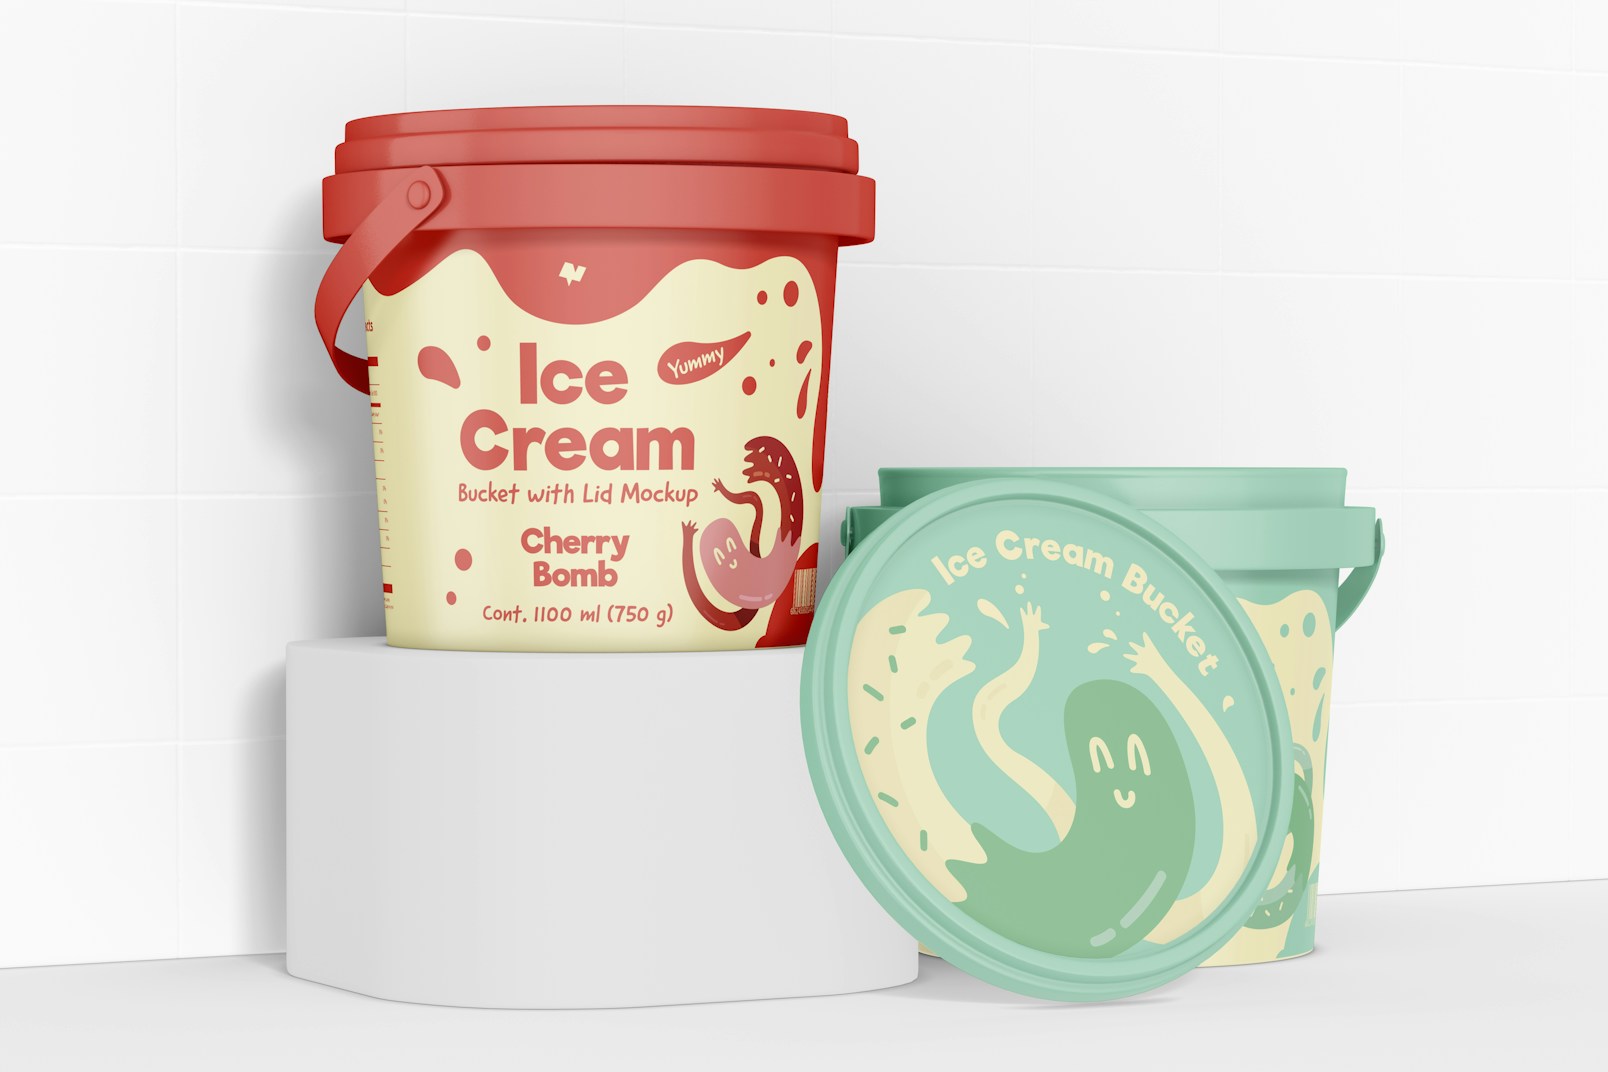 Ice Cream Buckets With Lid Mockup, Closed and Opened